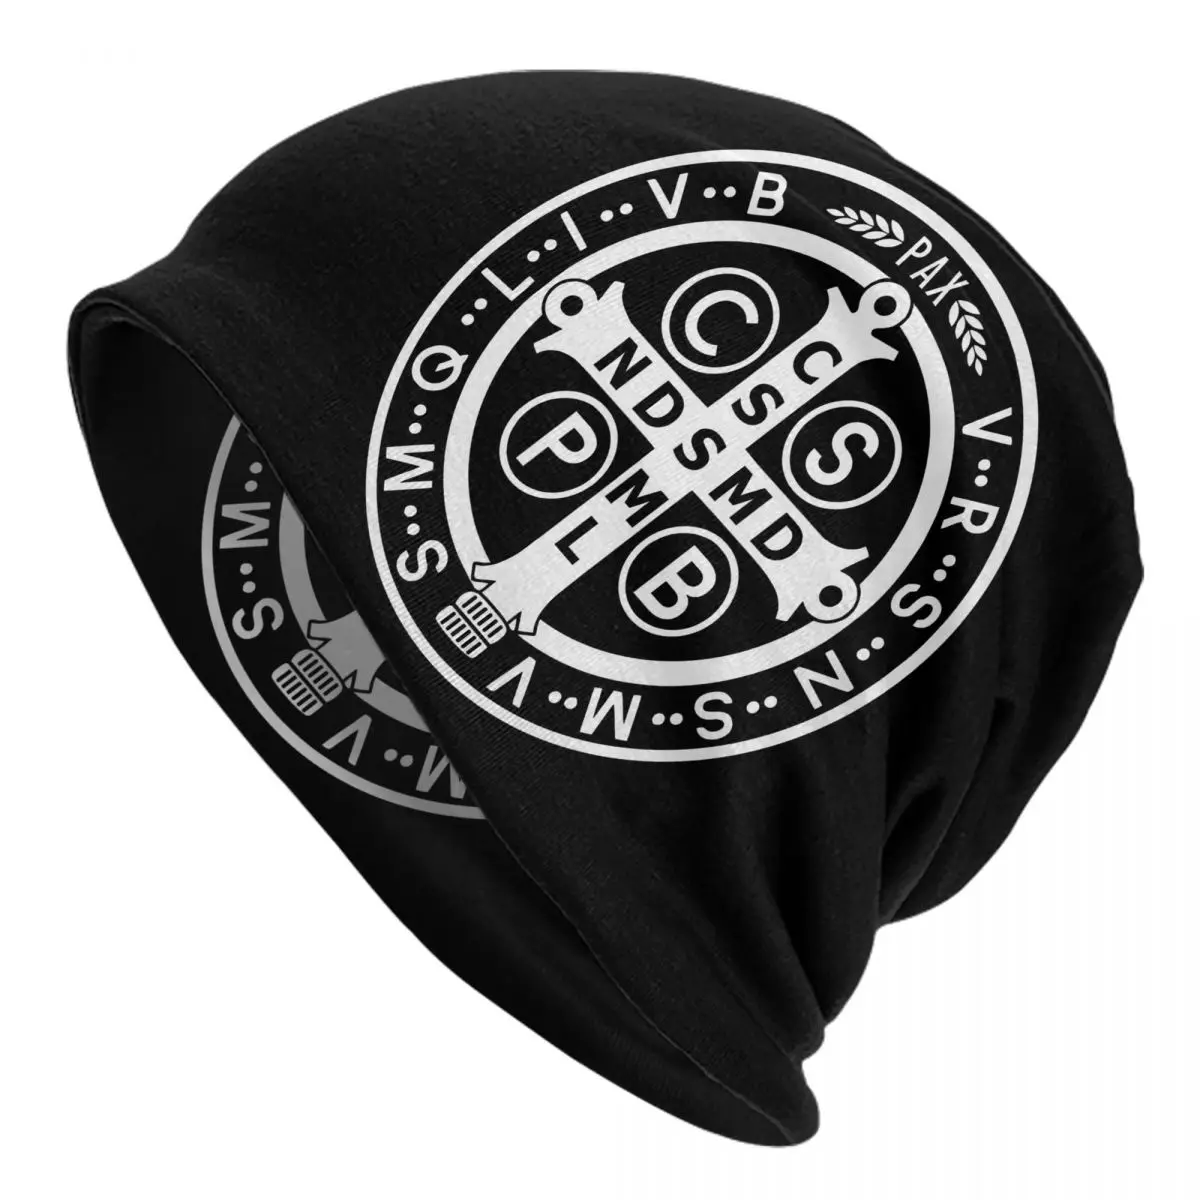 Saint Benedict Medal Adult Men's Women's Knit Hat Keep warm winter Funny knitted hat